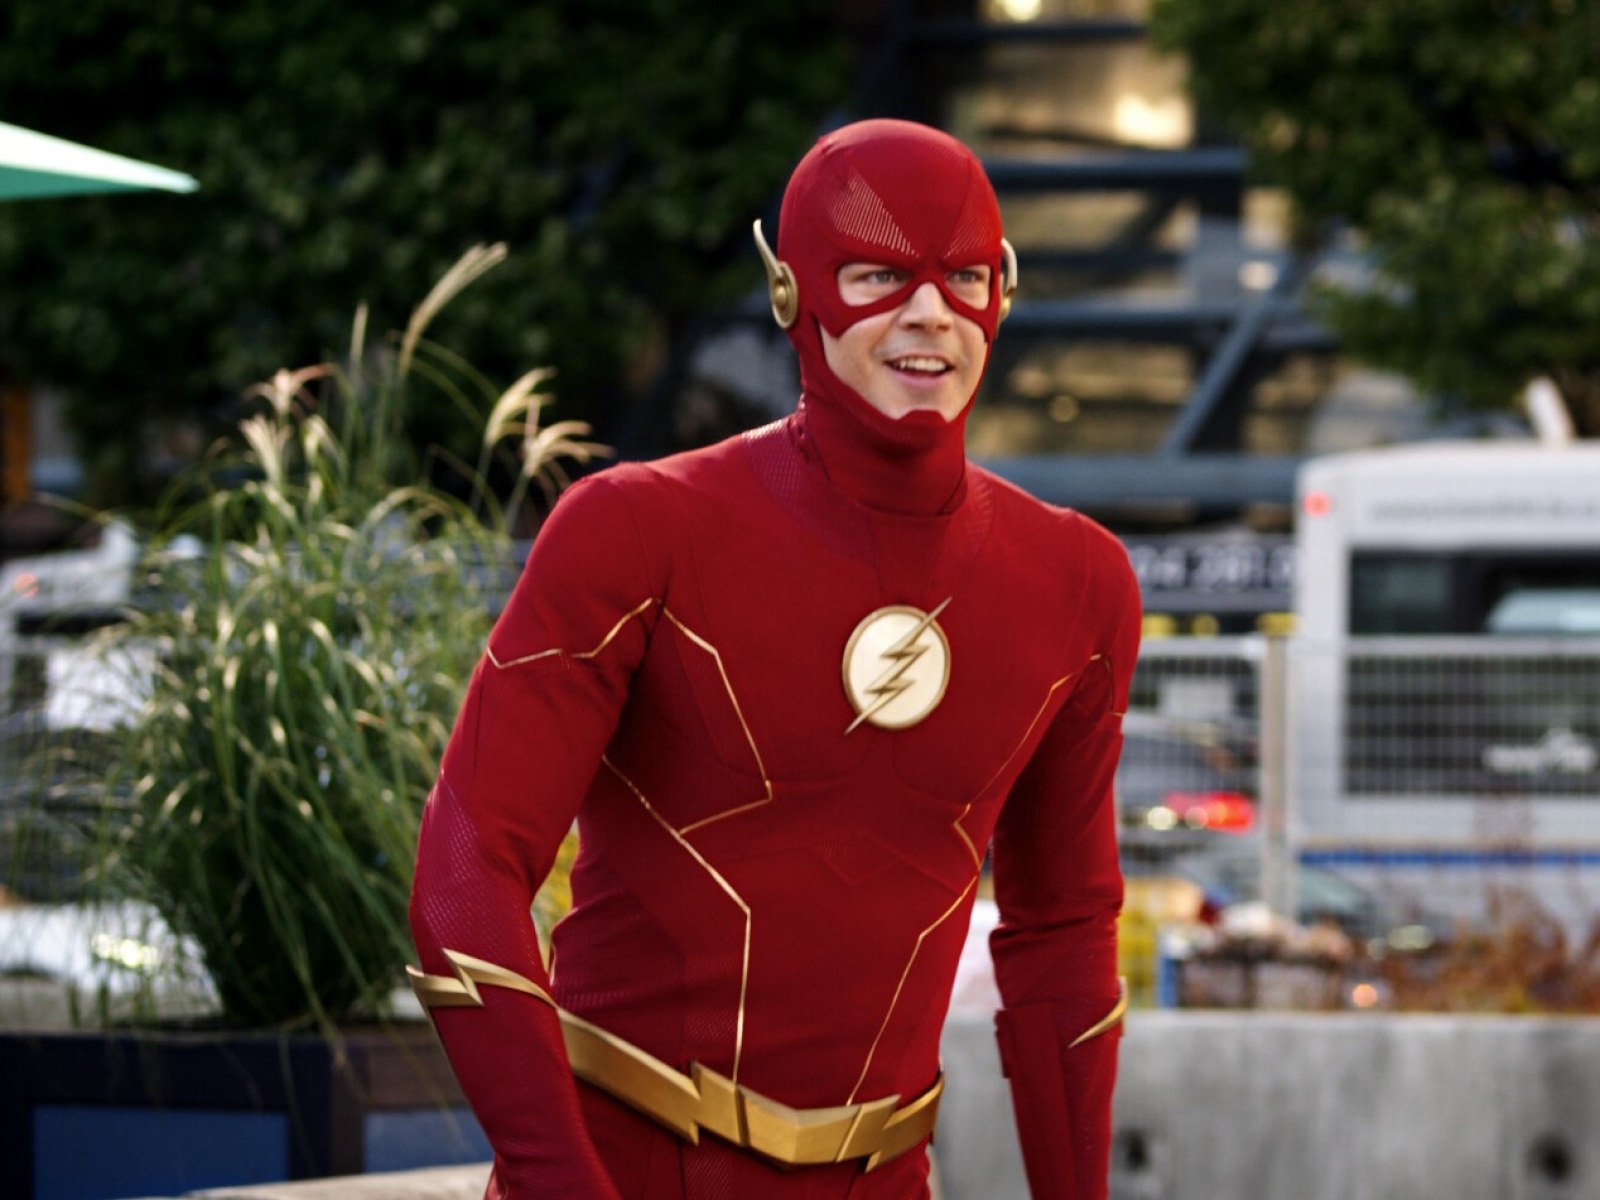 The Flash: The CW Sets Final Season Premiere Date For Grant Gustin Series